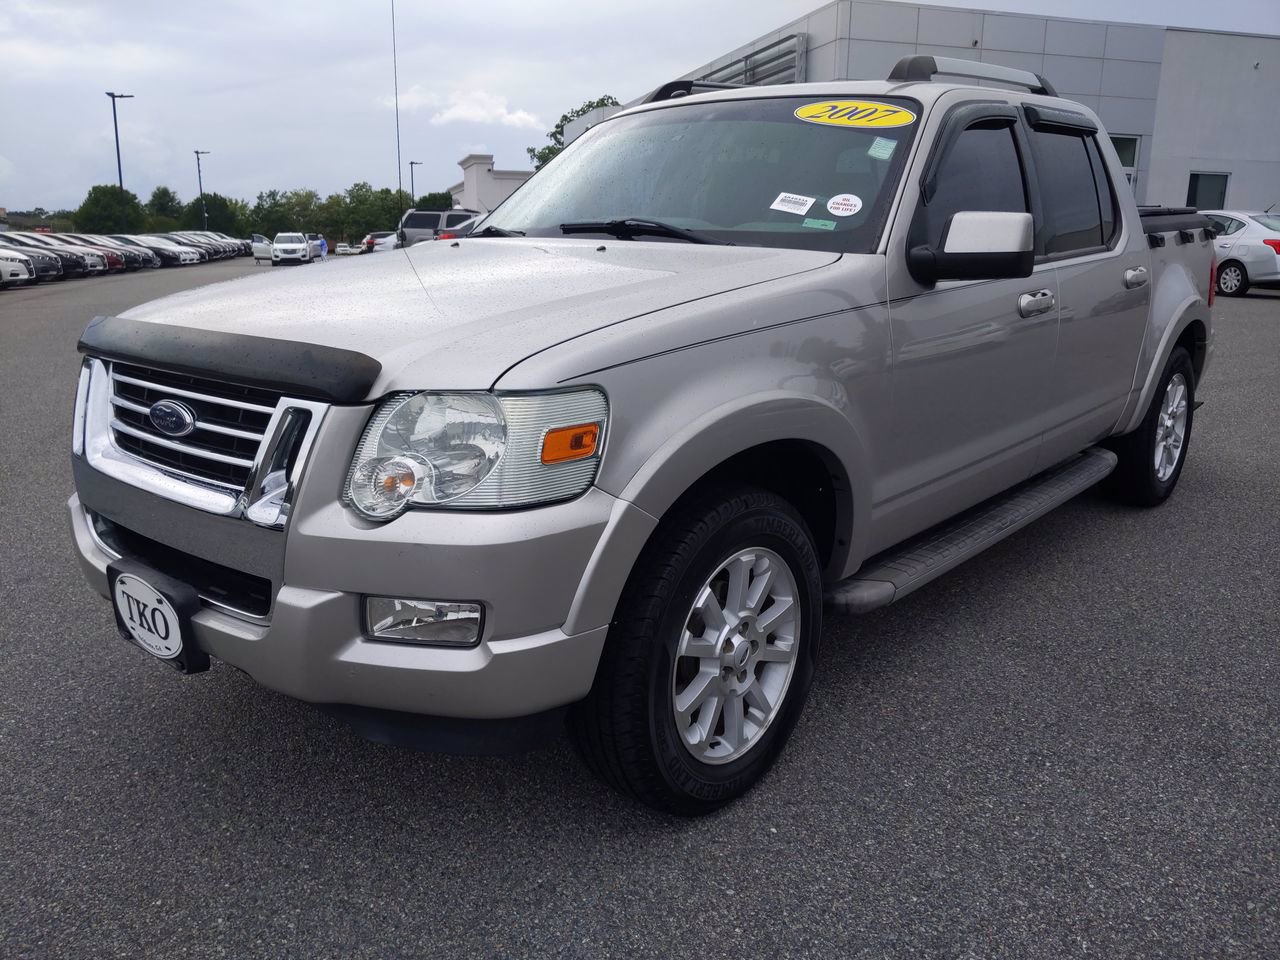 PreOwned 2007 Ford Explorer Sport Trac Limited Sport